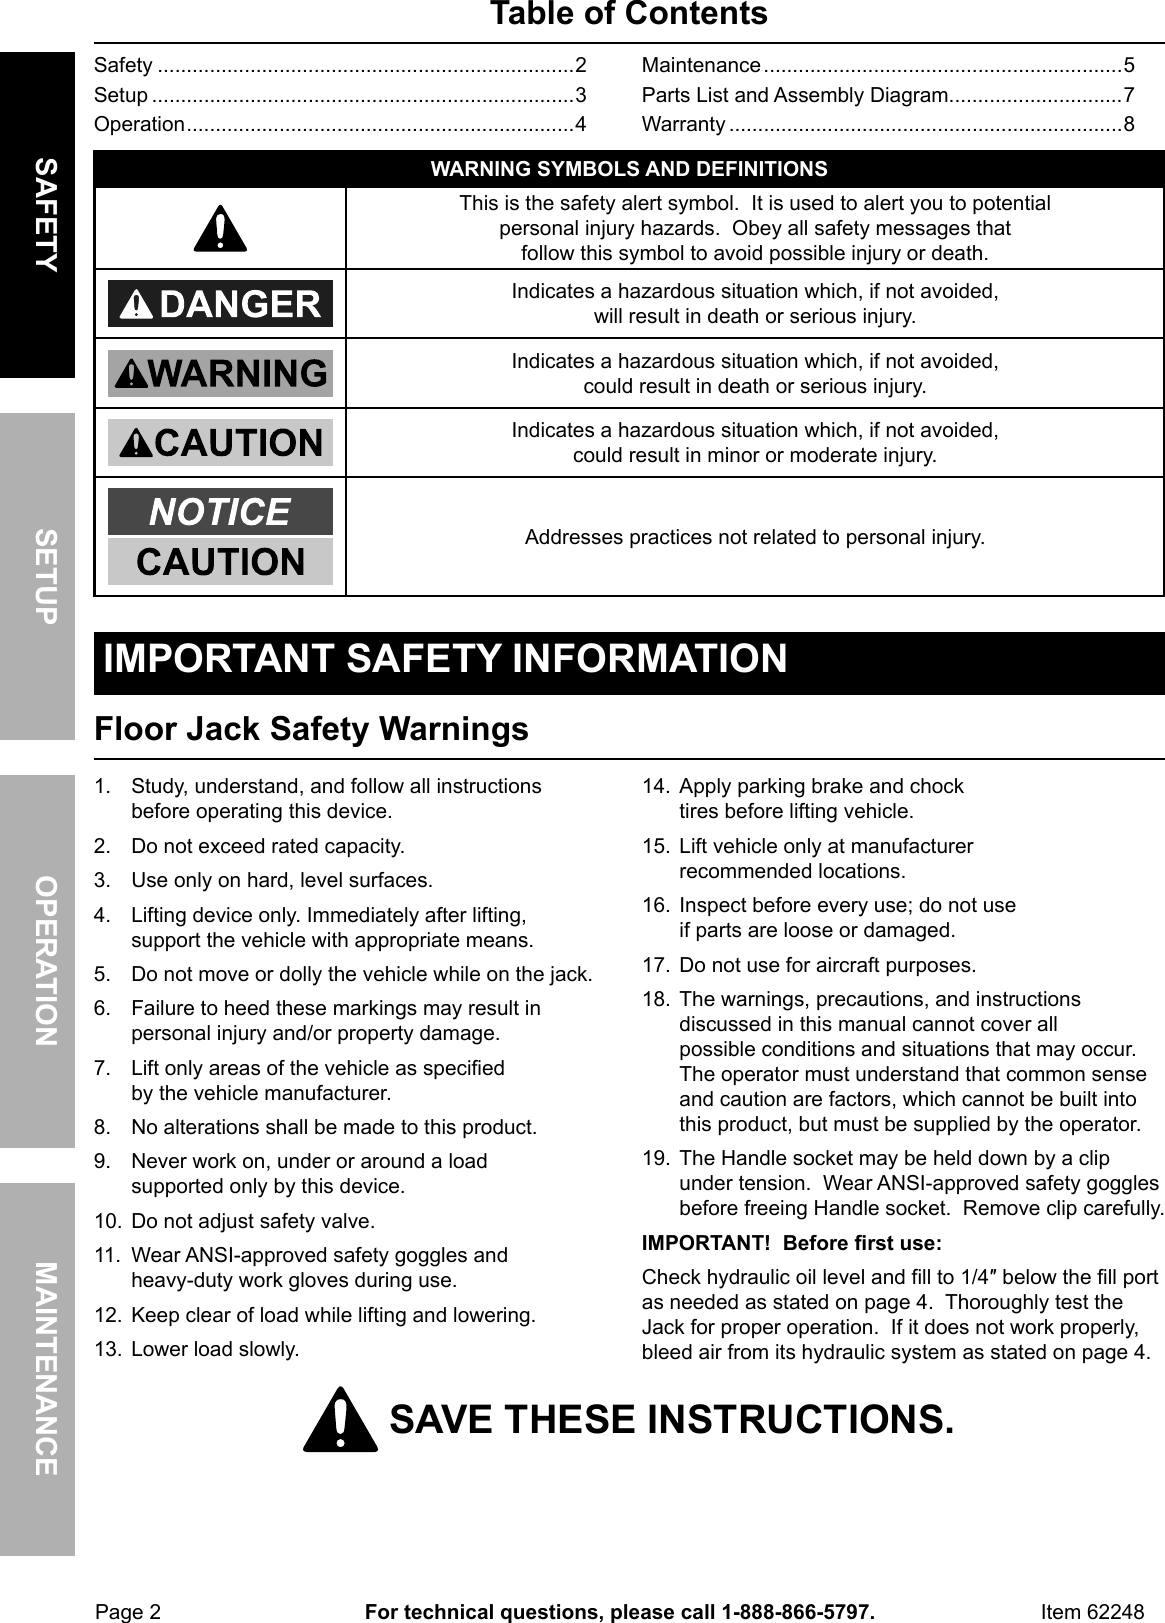 Page 2 of 8 - Manual For The 62248 3 Ton Aluminum Racing Floor Jack With Rapid Pump®